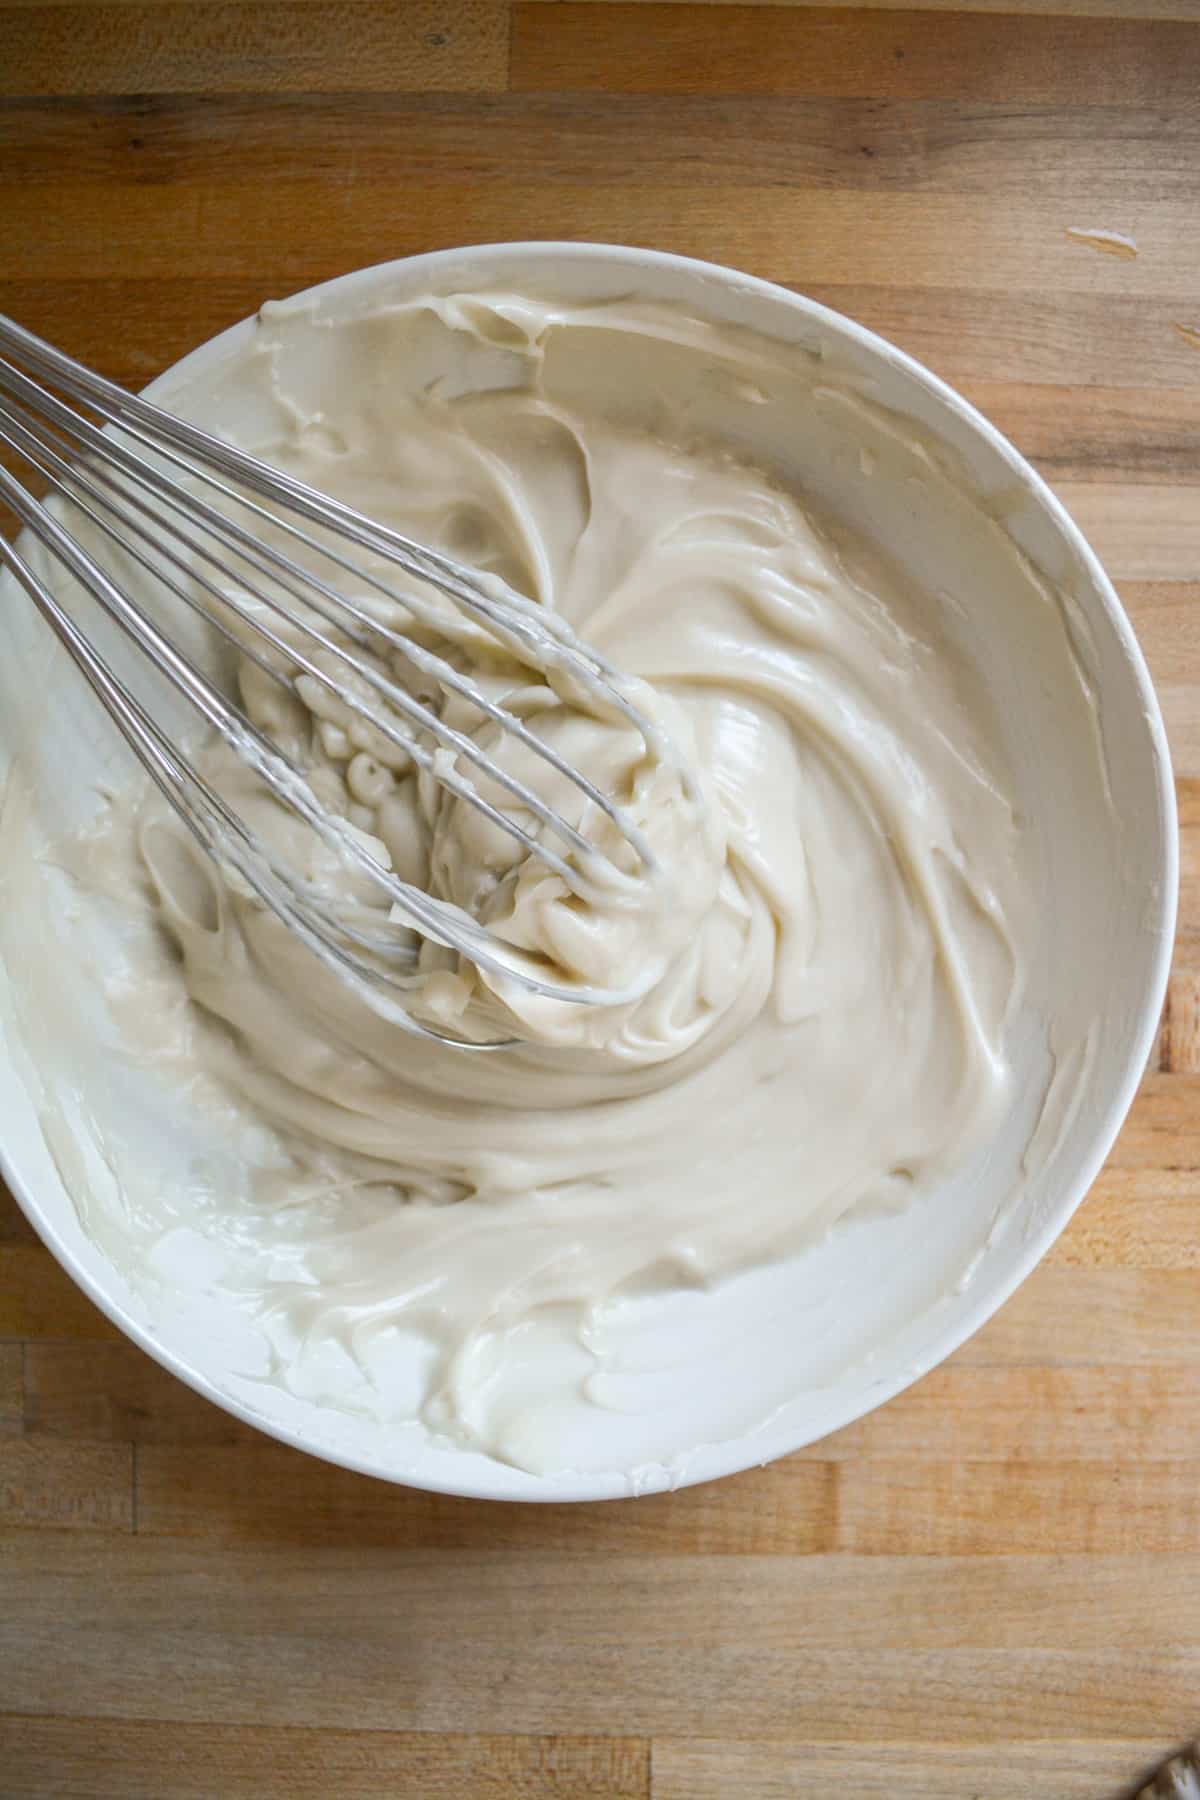 Cold pastry cream in a bowl whisked until smooth.